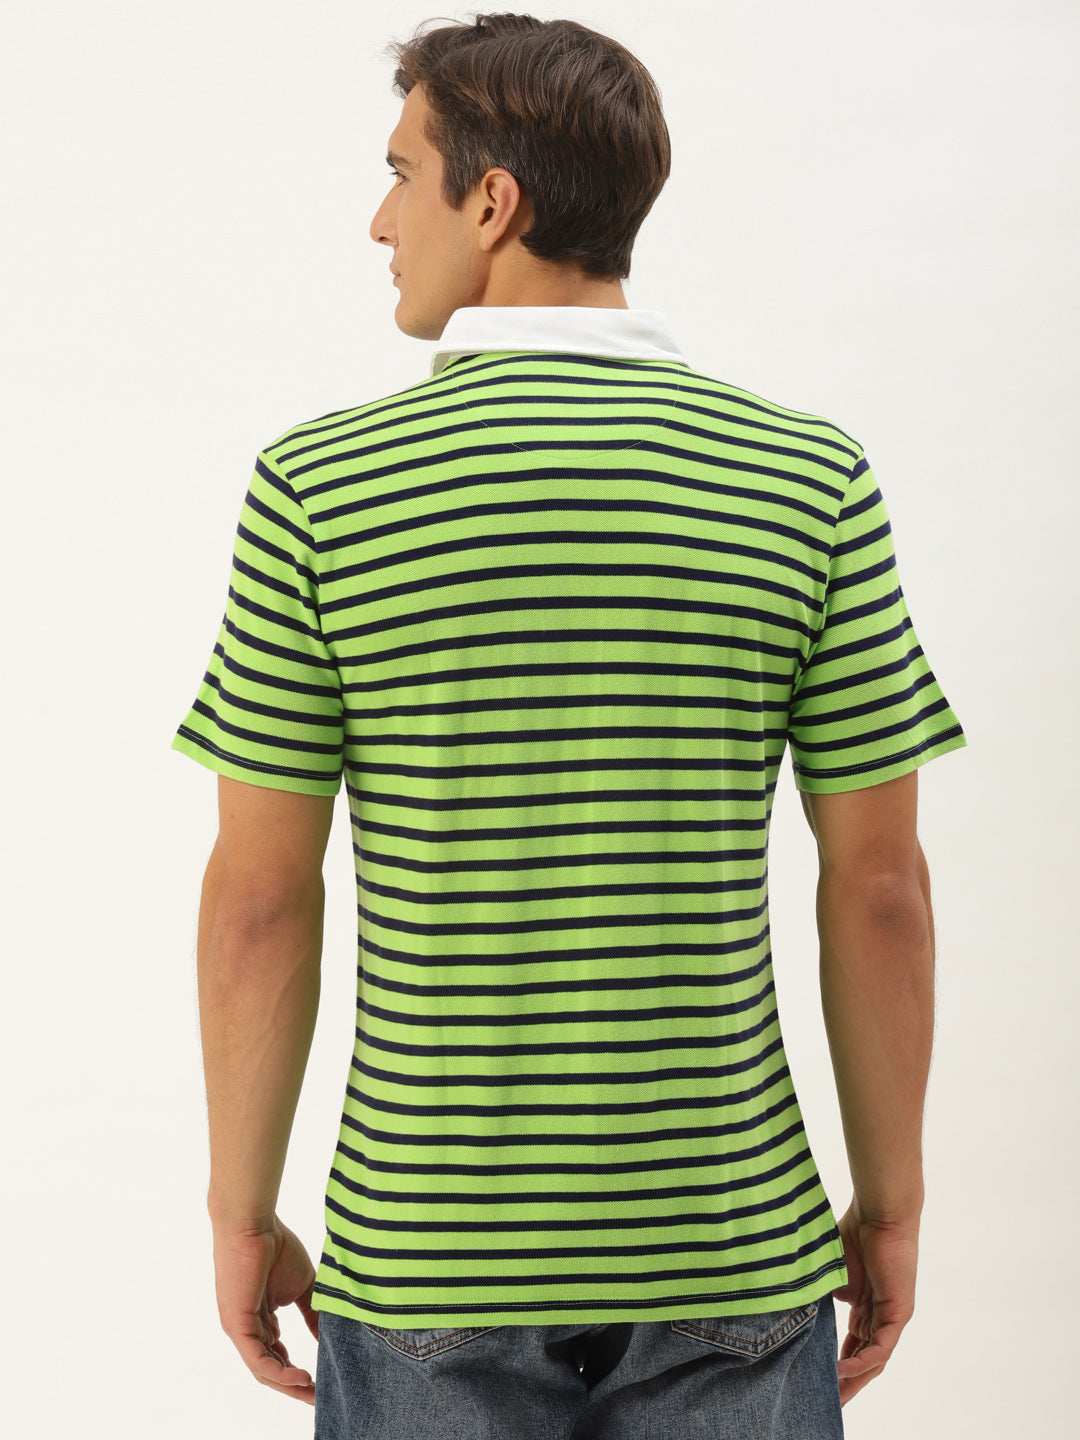 Men's Collar T-Shirts with Half Sleeves in Premium Cotton and Striped Patterns